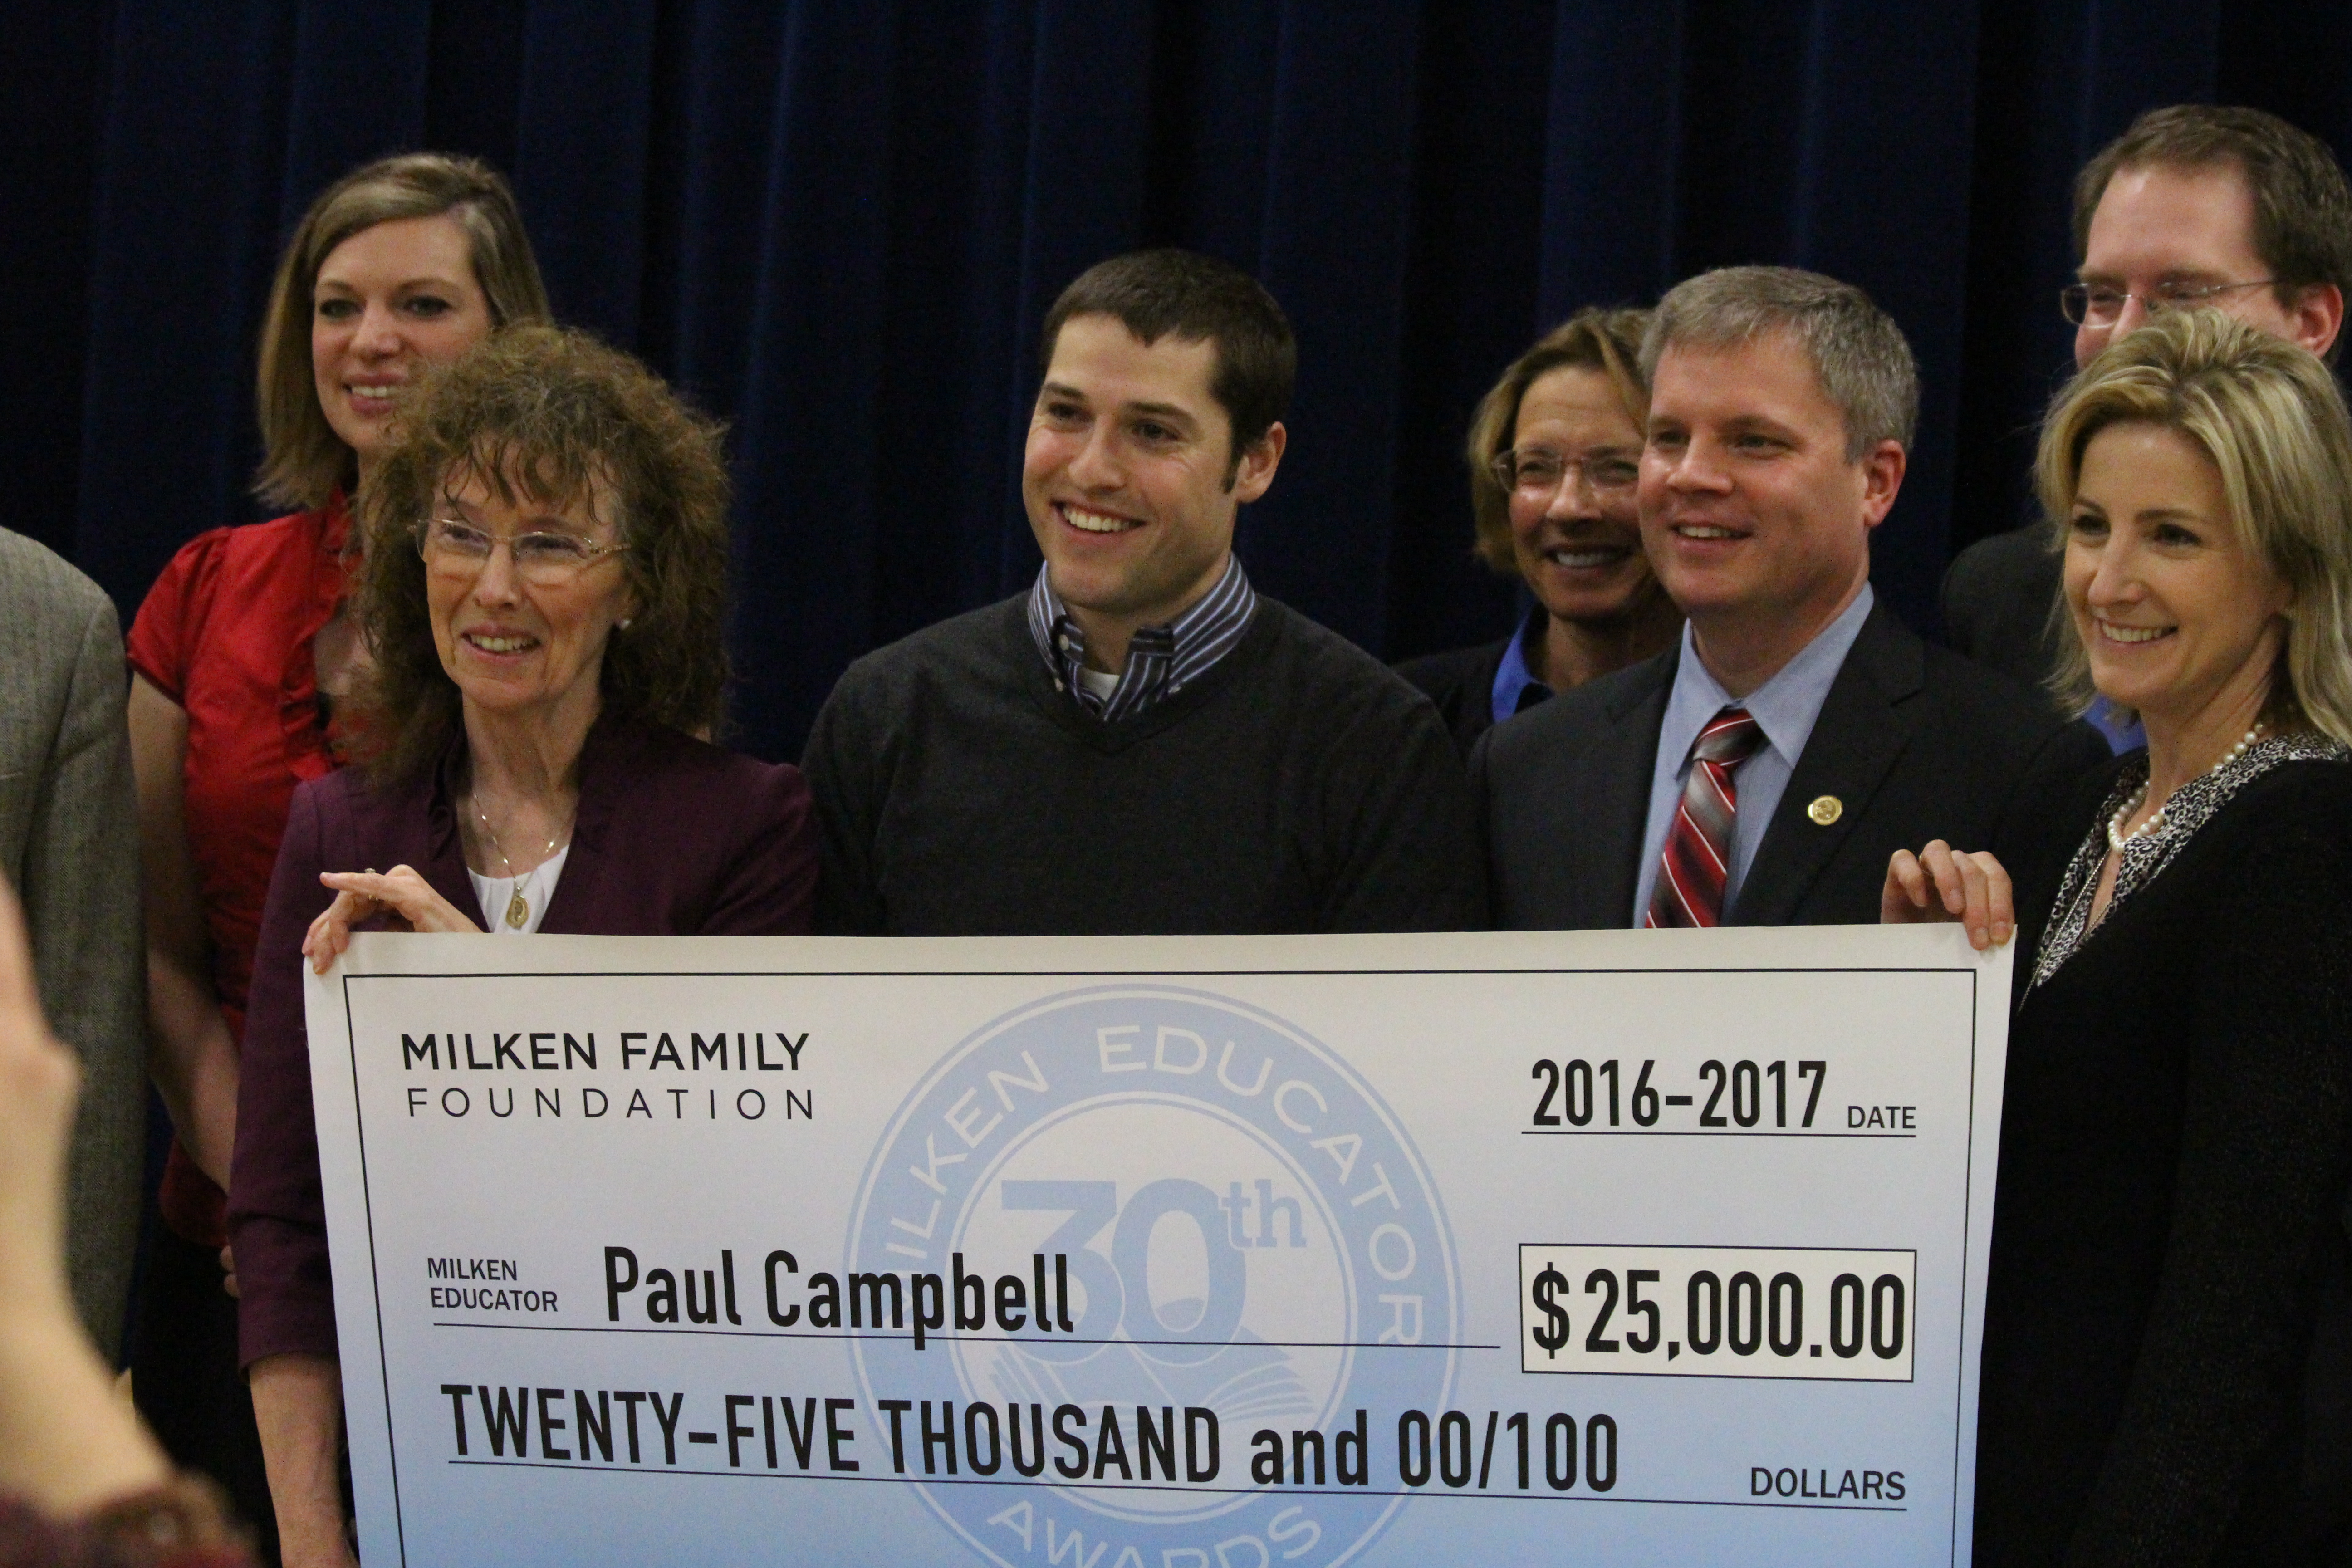 Paul Campbell holds his over-sized check for $25,000. (Photo by Wesley Early, Alaska Public Media - Anchorage)